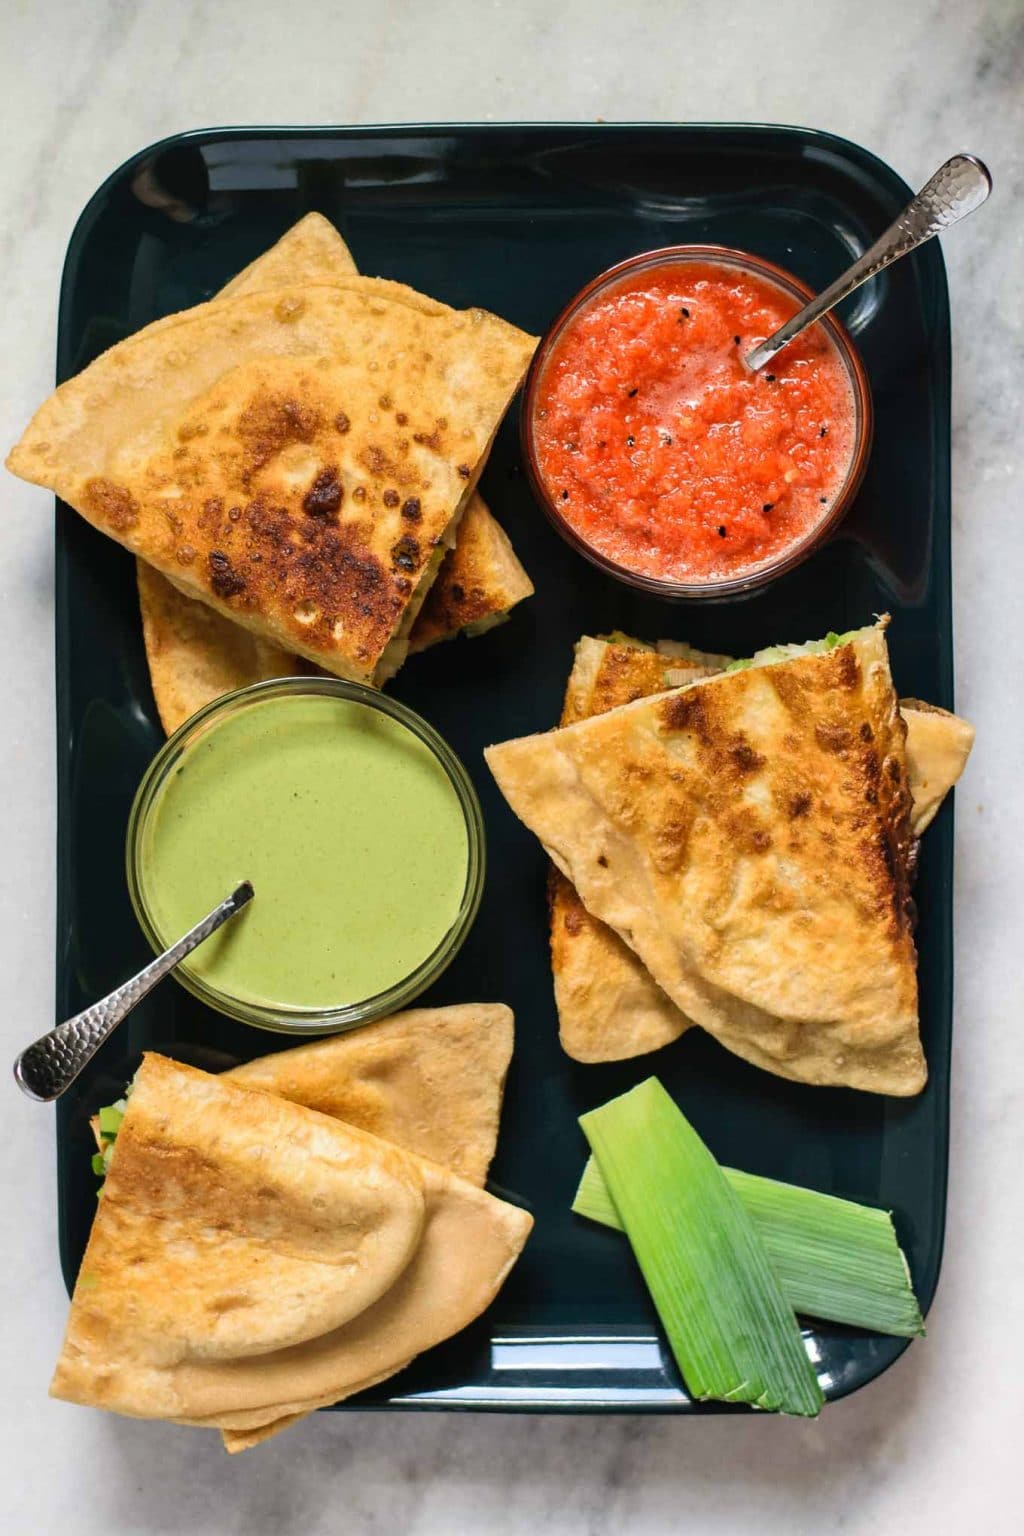 leek bolani served with coriander chutney and red pepper chutney